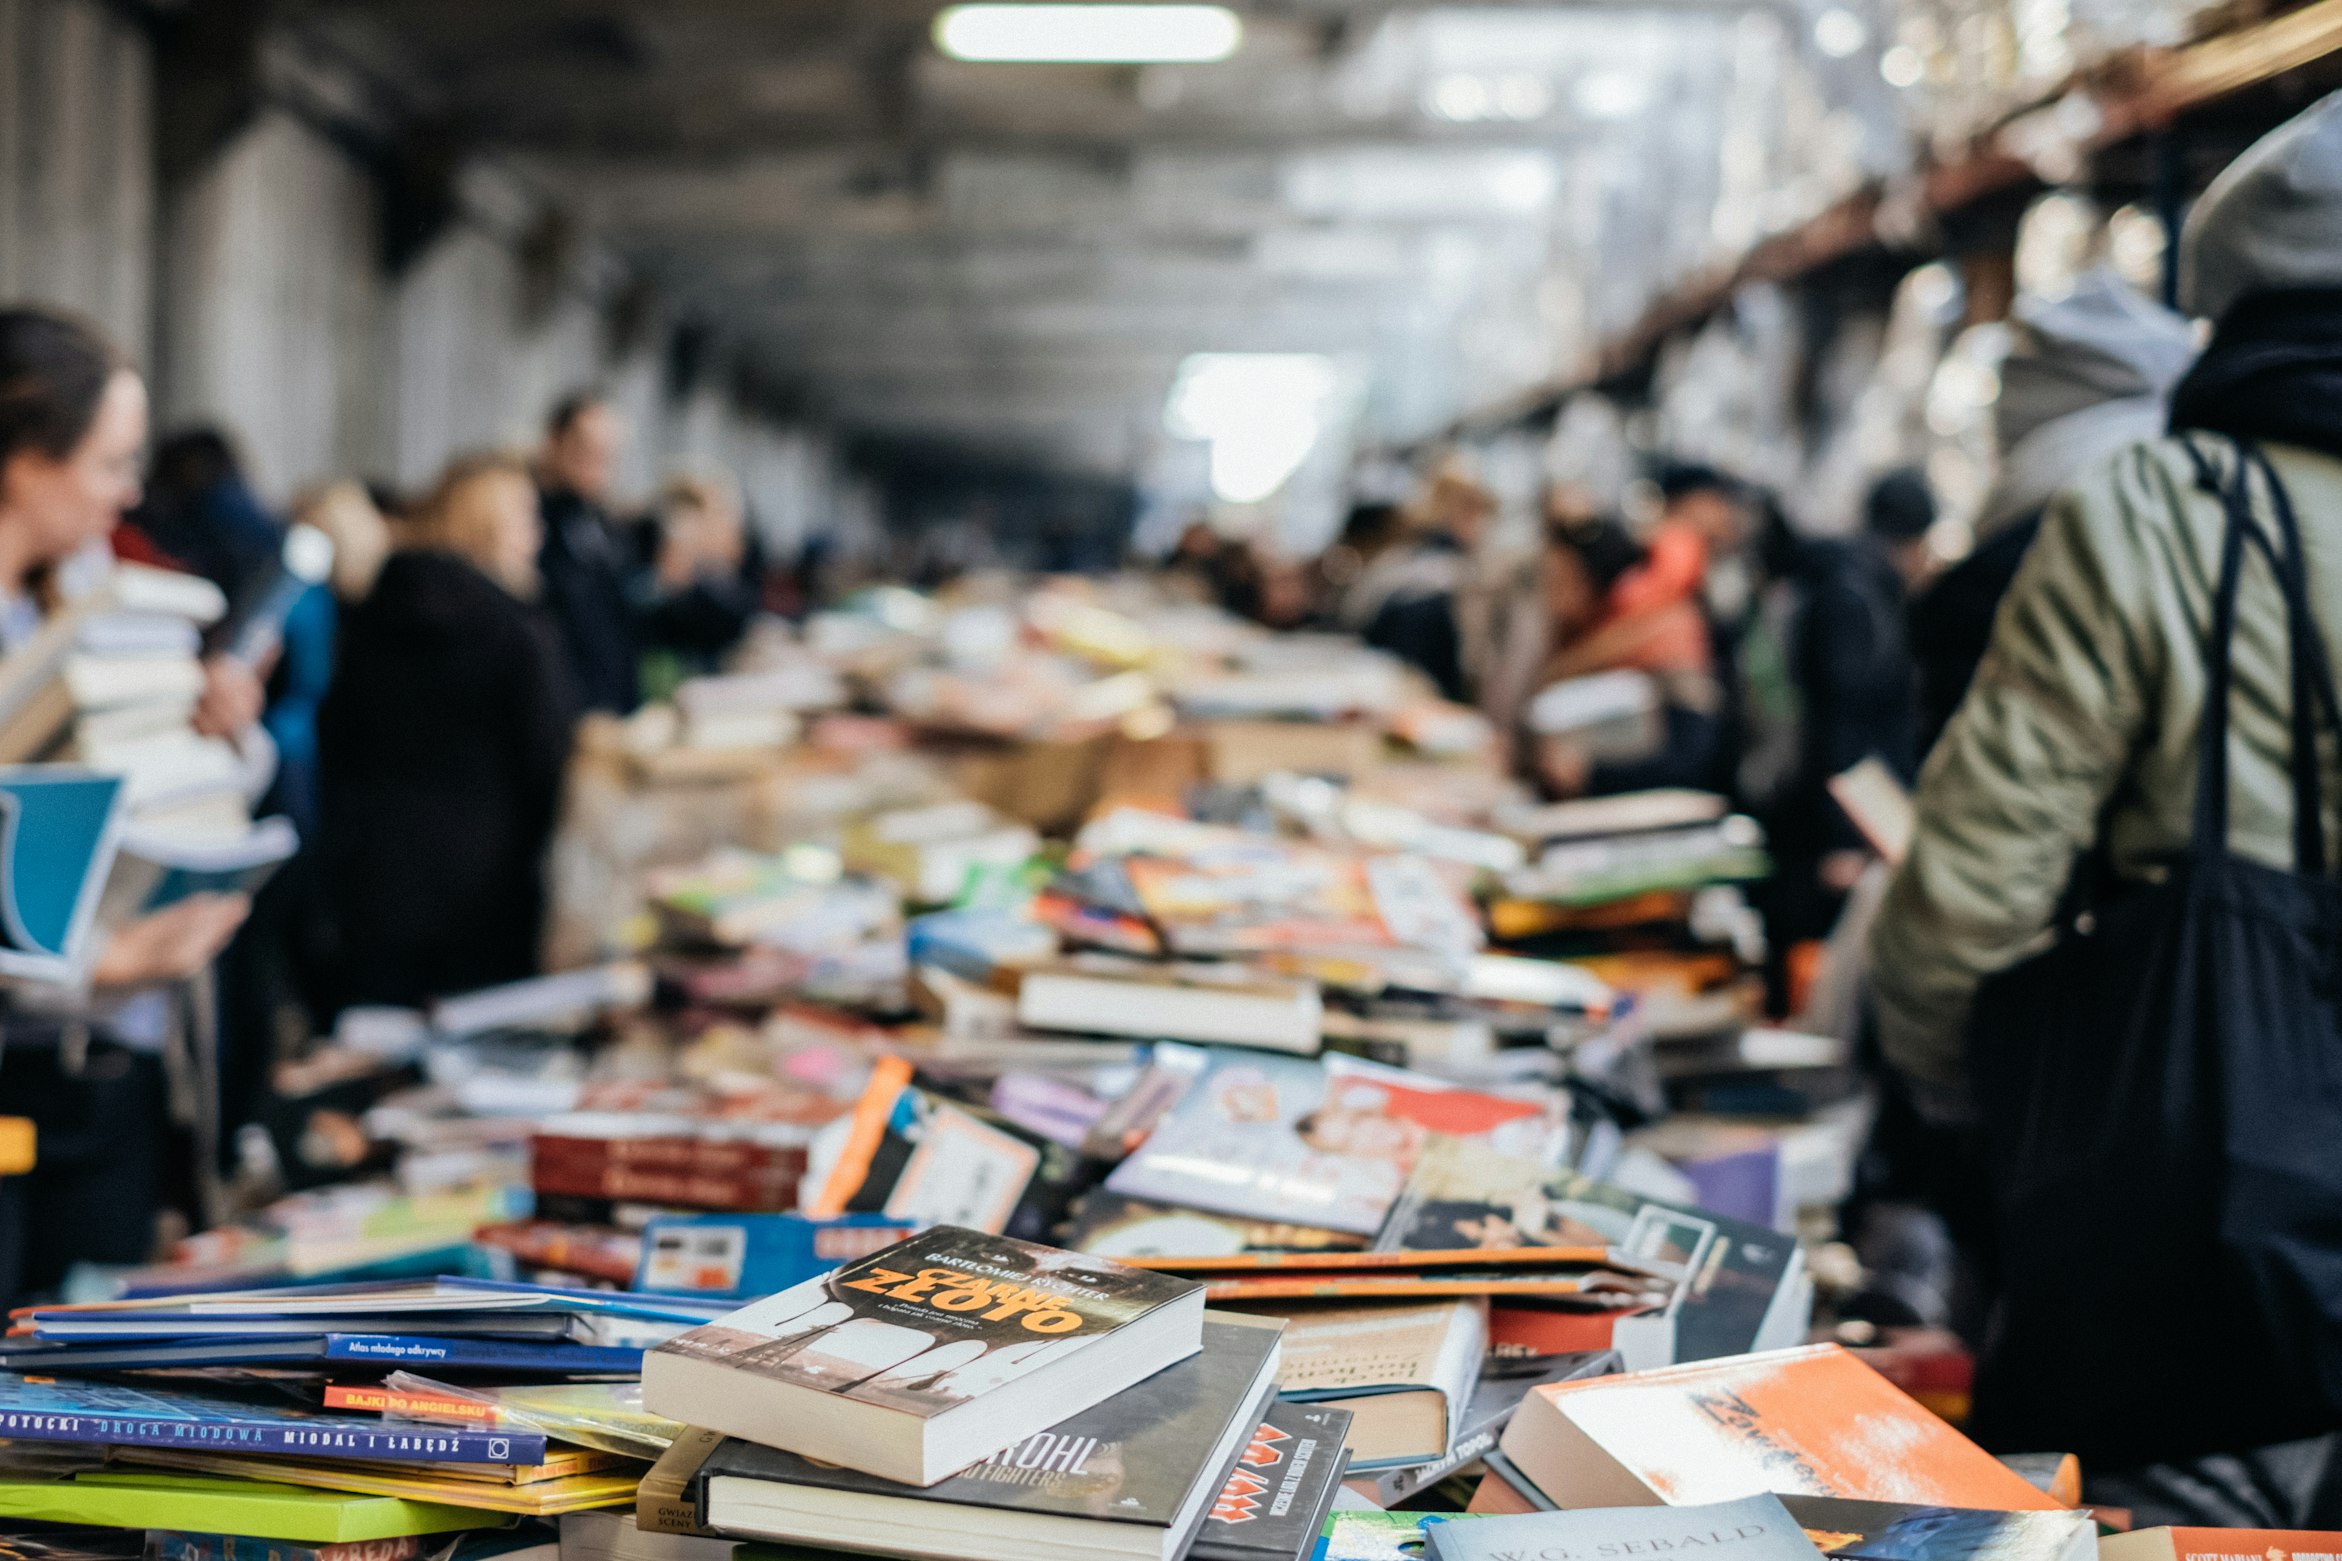 Unsplash image from freestocks showing books messily displayed on a table